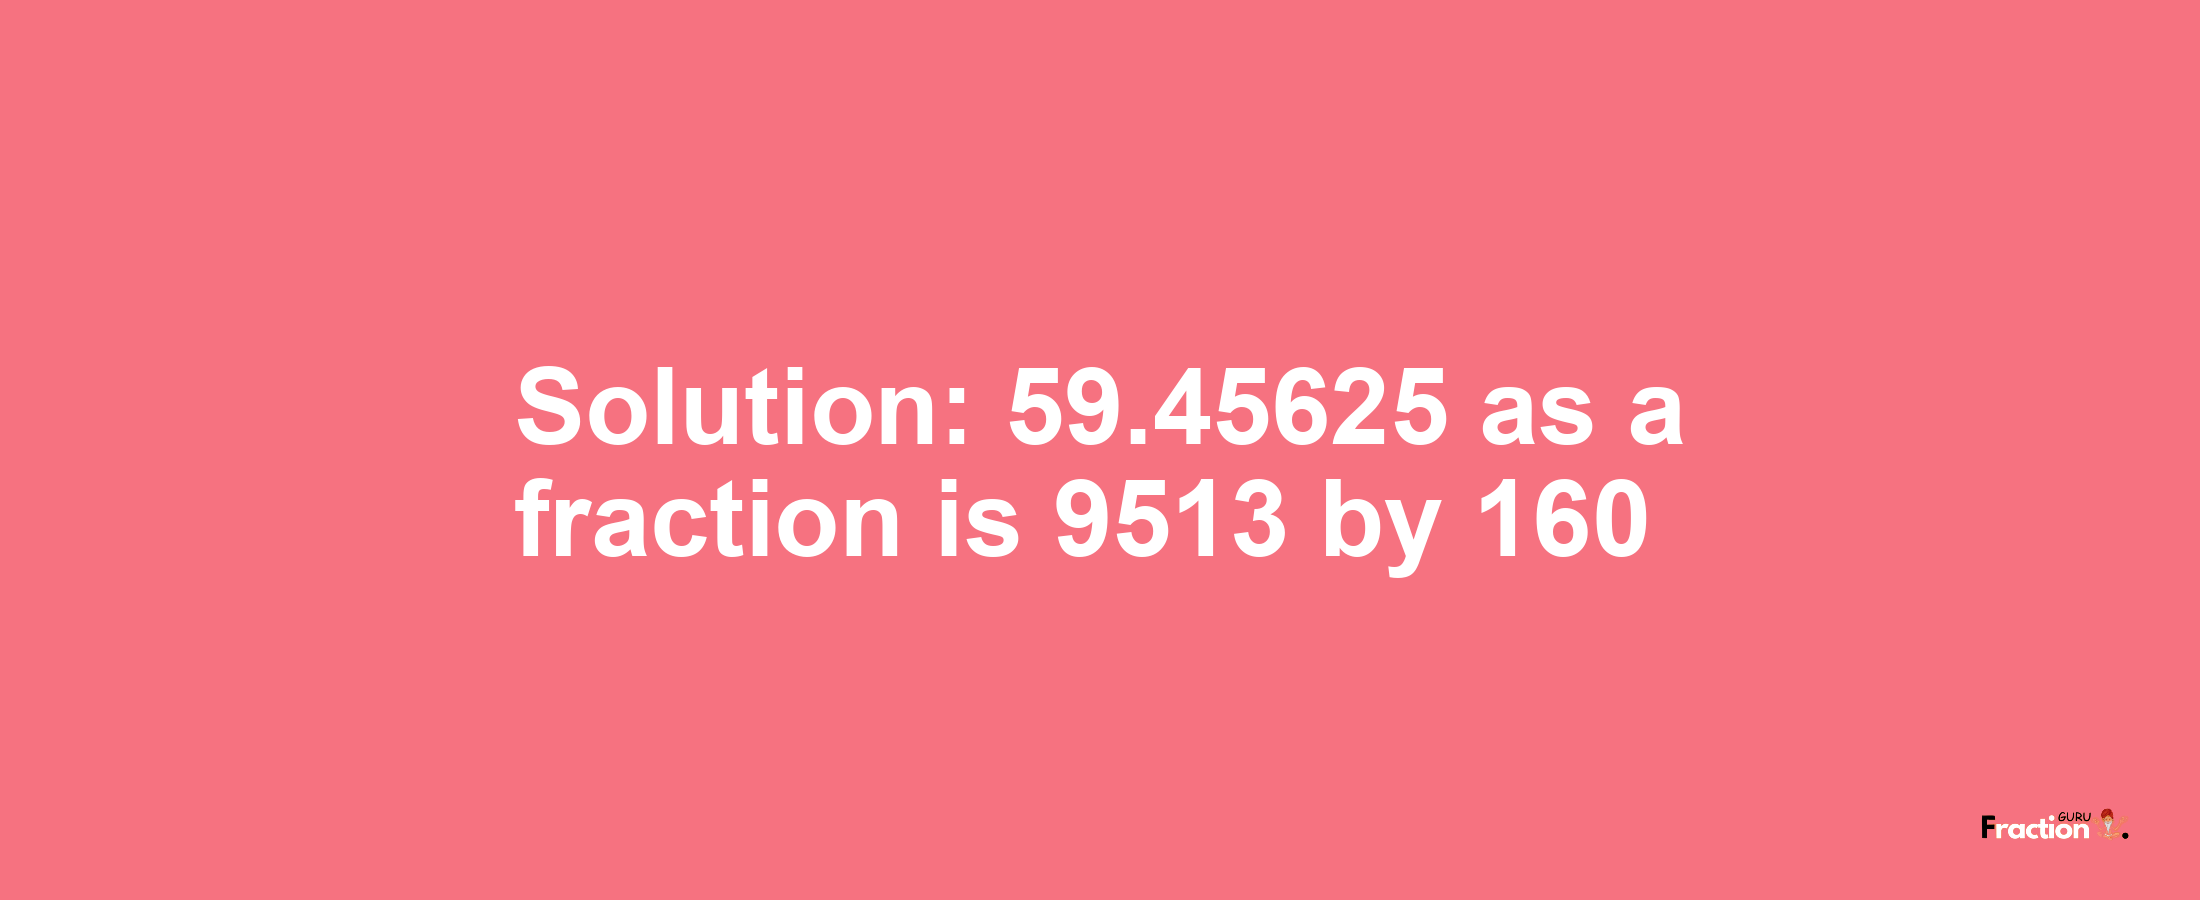 Solution:59.45625 as a fraction is 9513/160